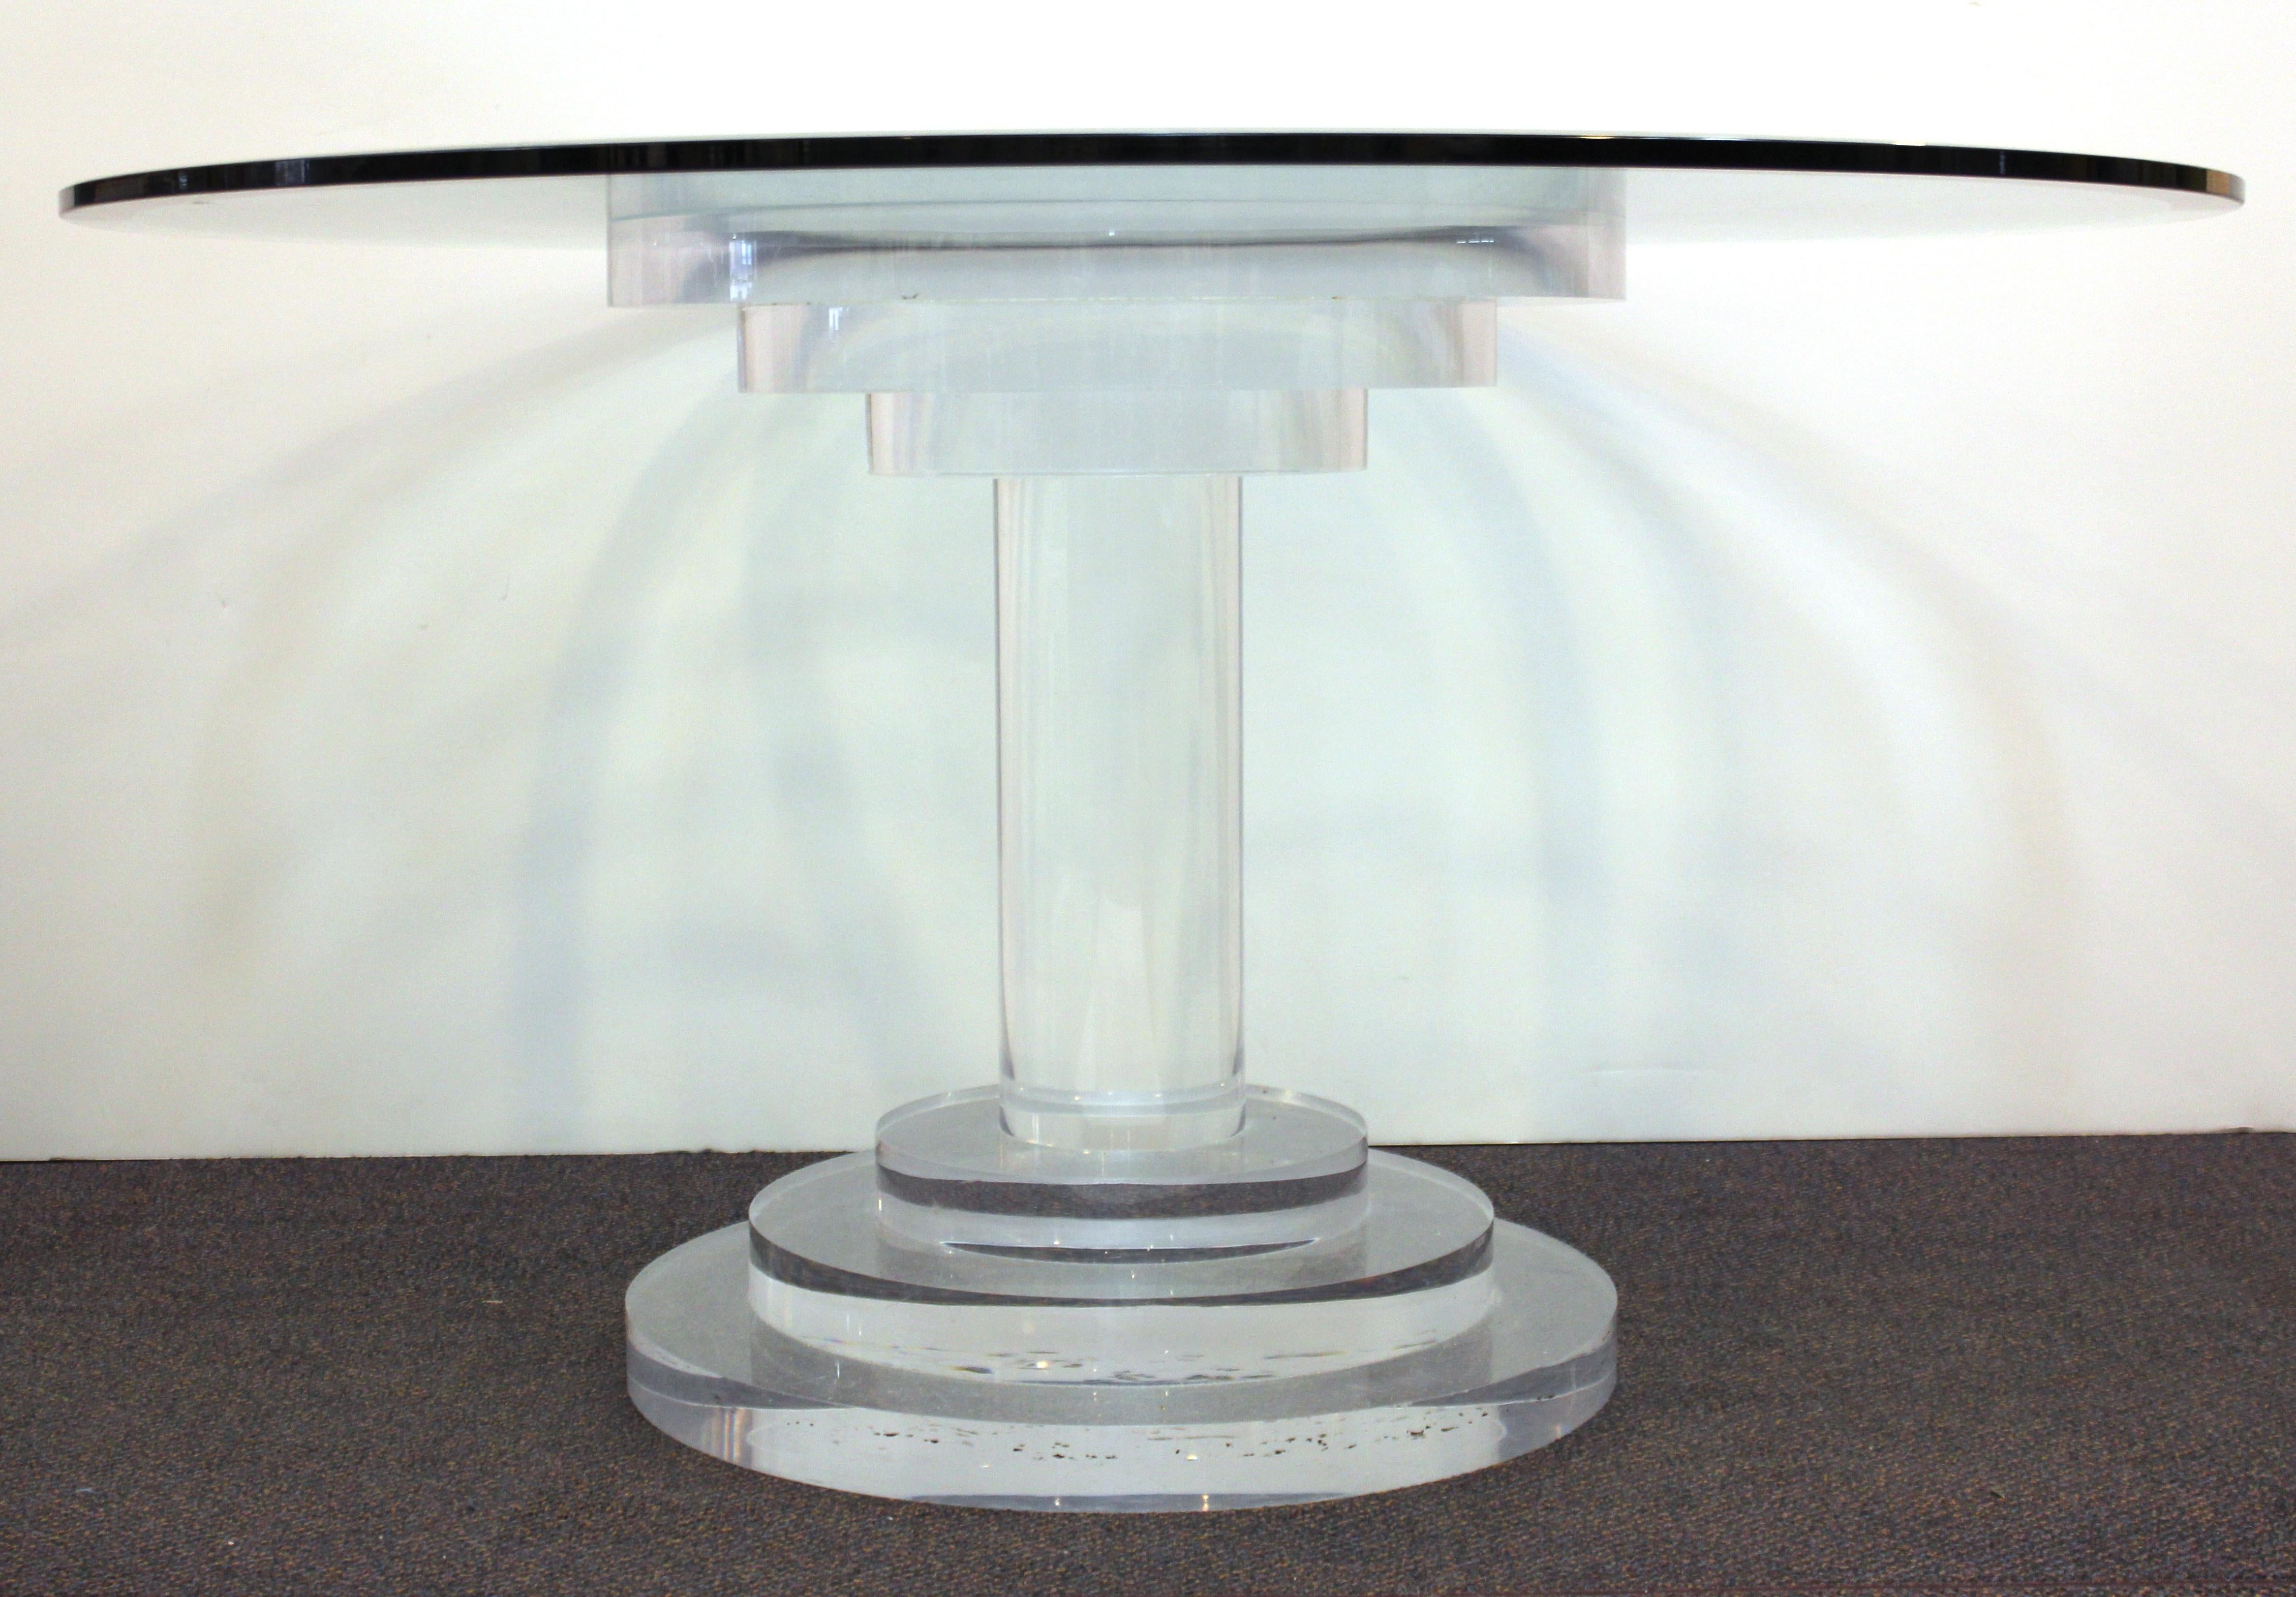 Modern circular dining room table or center table consisting of a heavy glass top on a Lucite base made of stacked concentric cylinders of Lucite. The piece is in great vintage condition with age-appropriate wear.